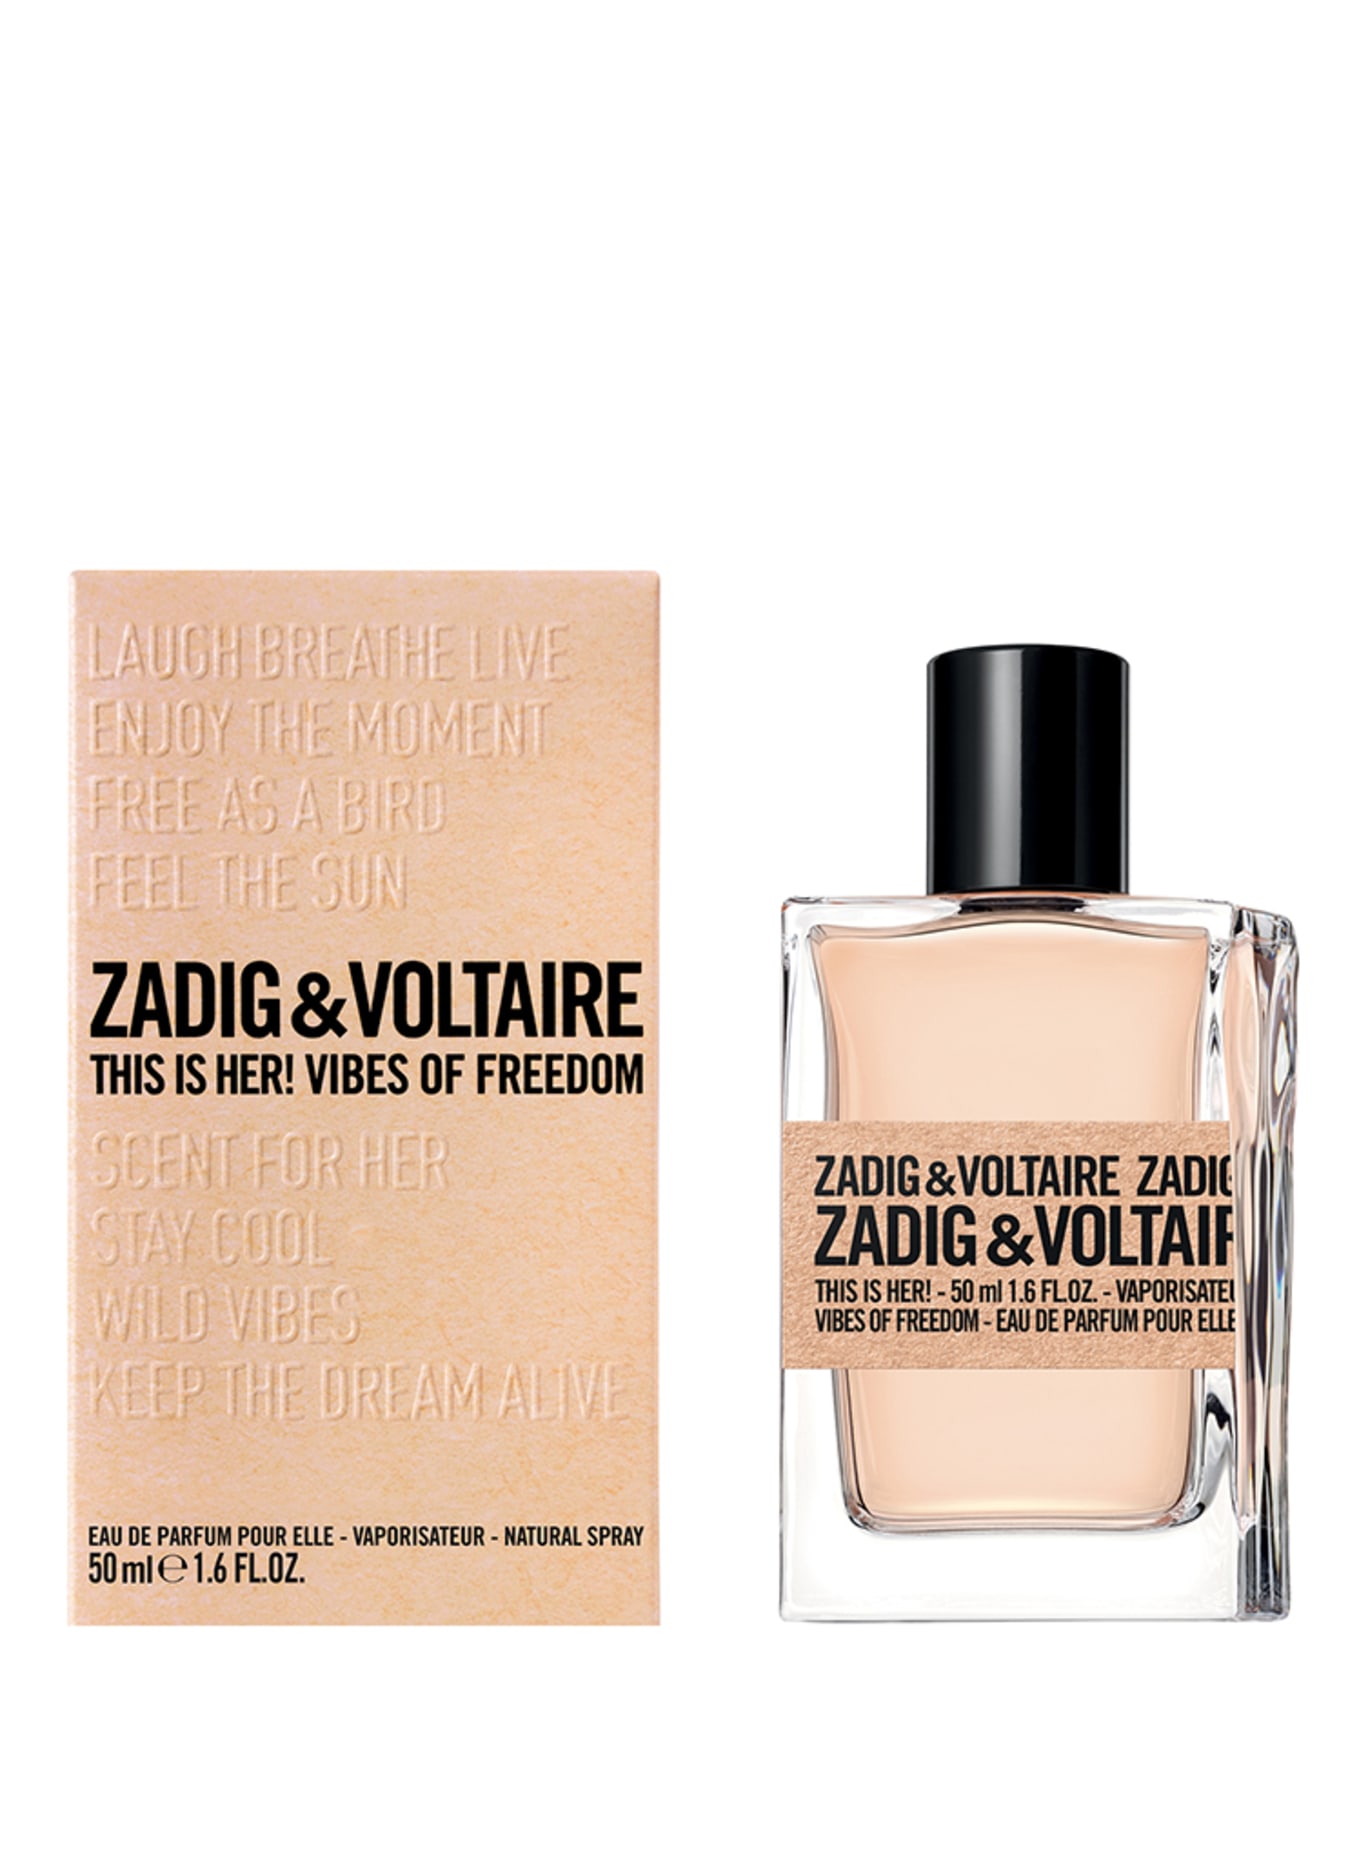 ZADIG & VOLTAIRE Fragrances THIS IS HER! VIBES OF FREEDOM (Obrázek 2)